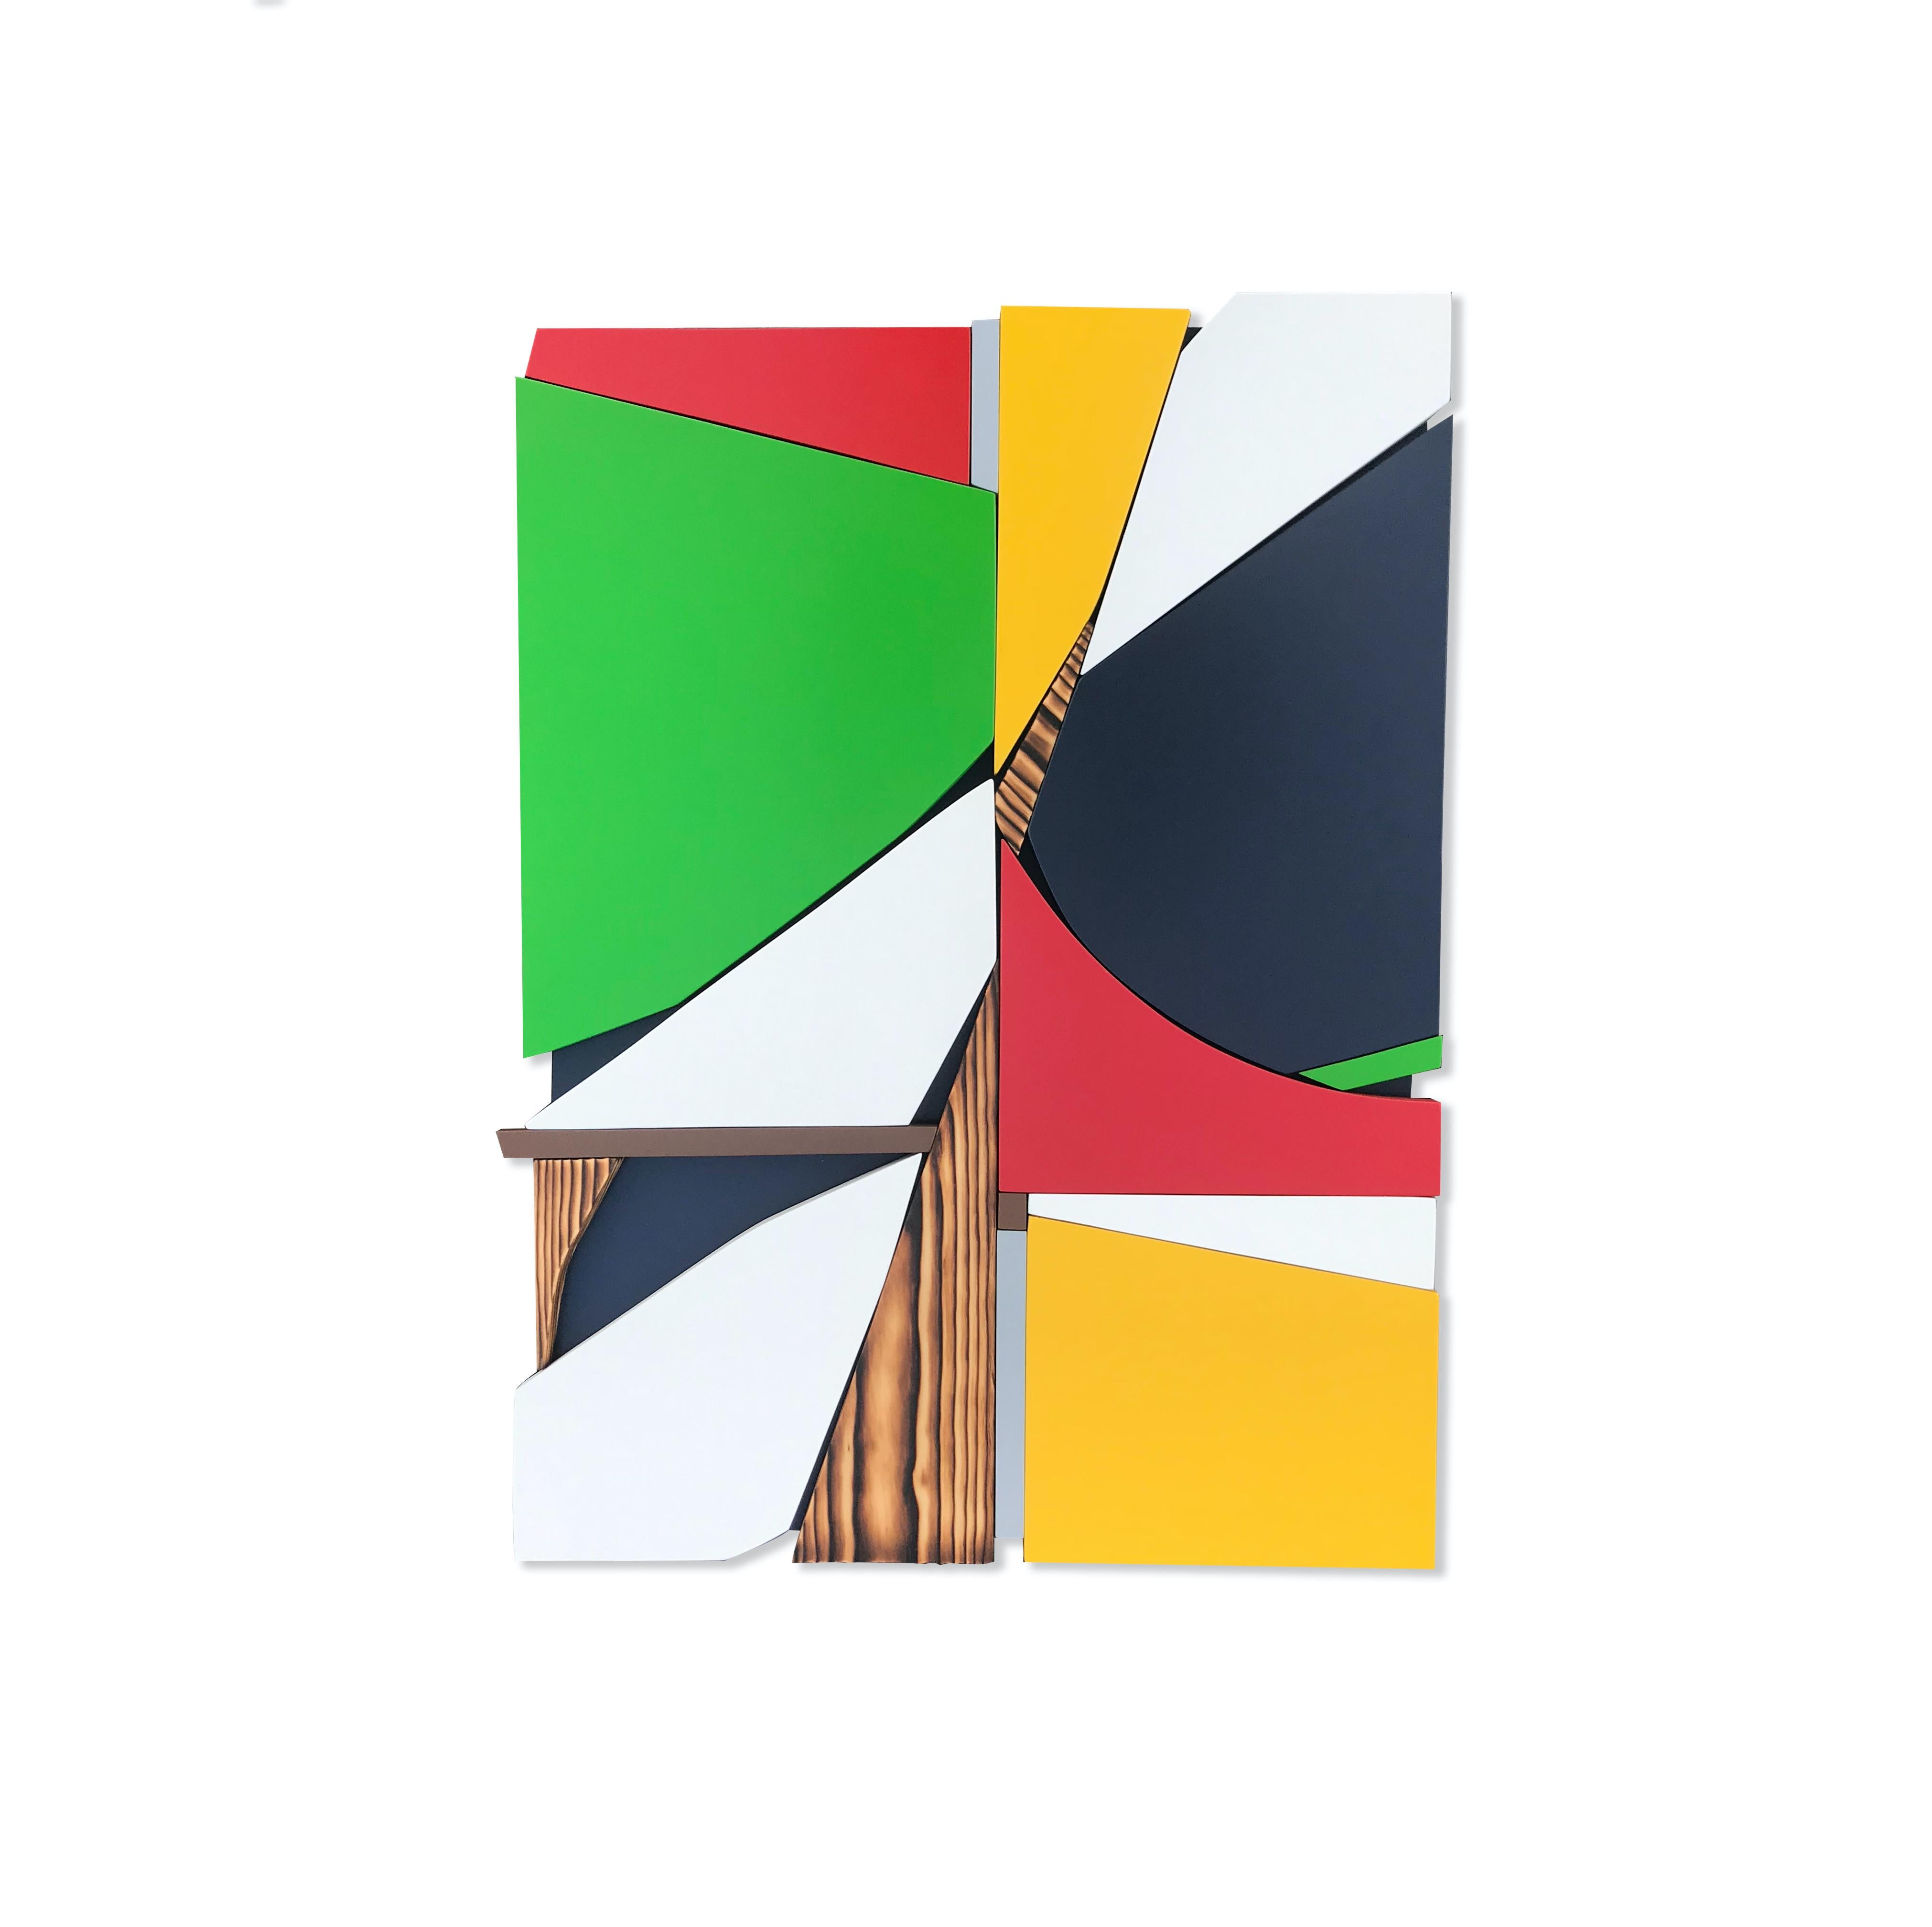 Scott Troxel Abstract Sculpture - SSB4 (red yellow black mid-century wood wall sculpture green abstract geometric)